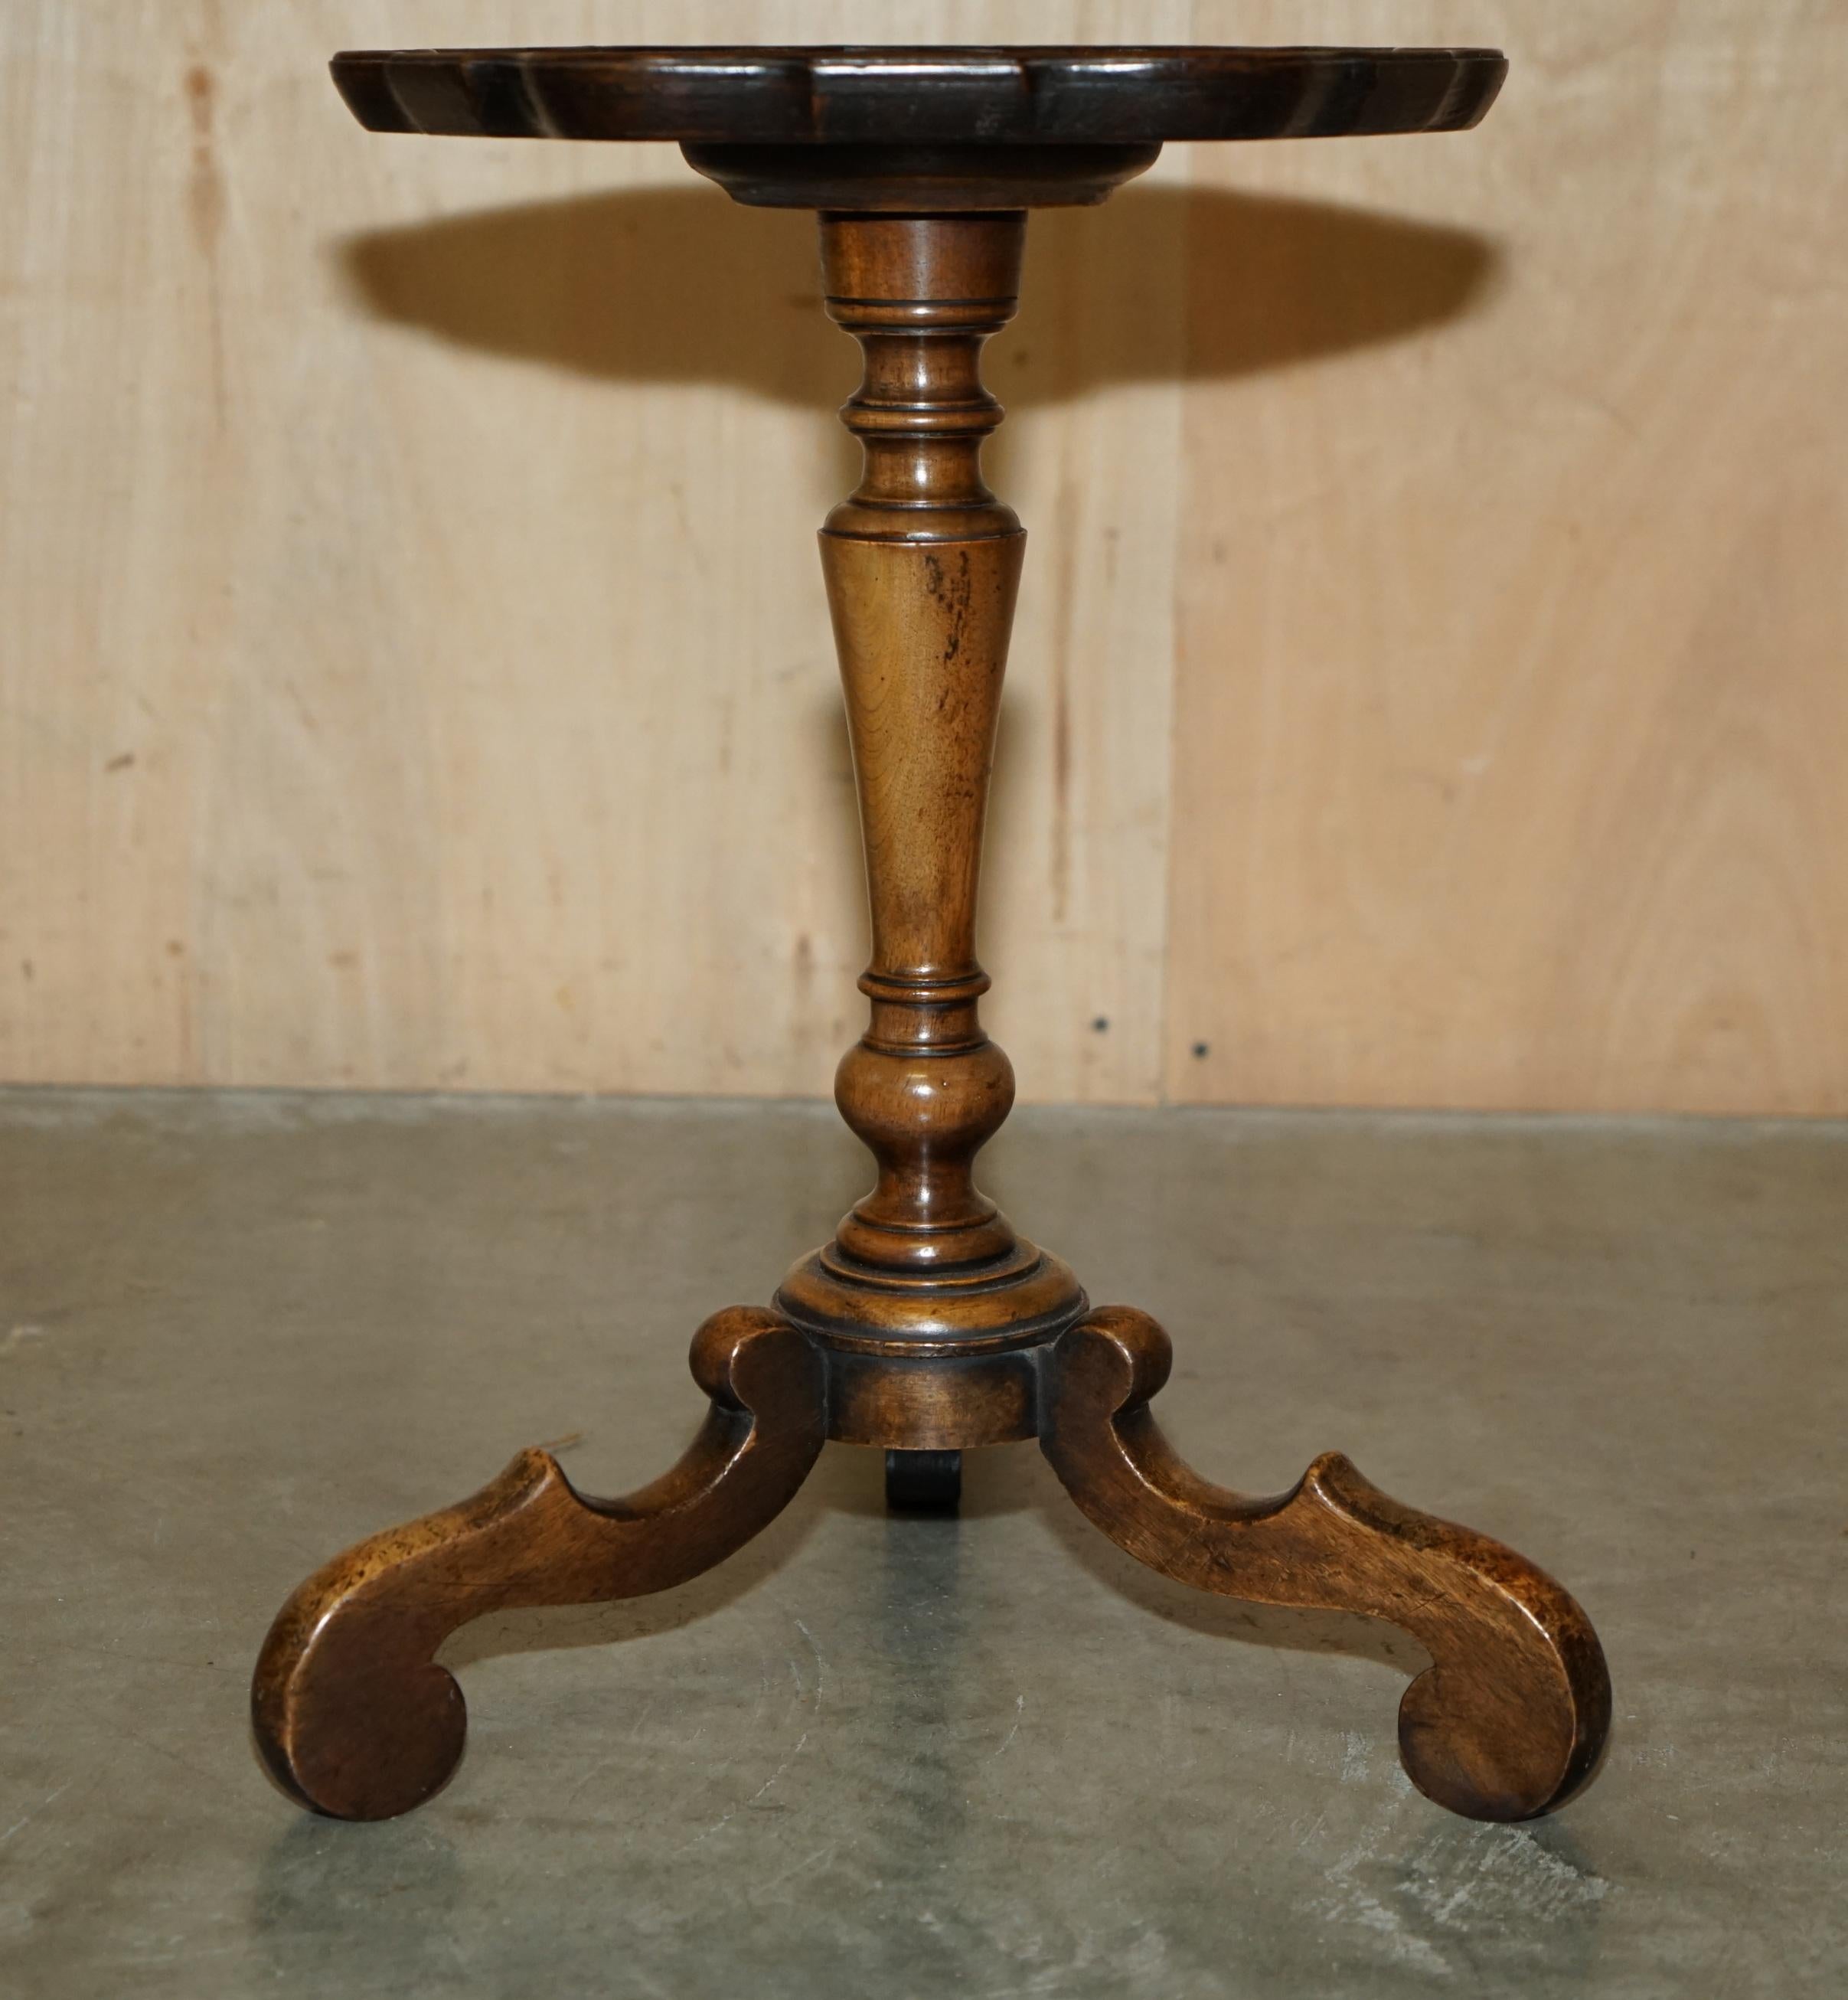 FULLY RESTORED ANTIQUE CHARLES TOZER OYSTER HARDWOOD TRIPOD SiDE END LAMP TABLE For Sale 1